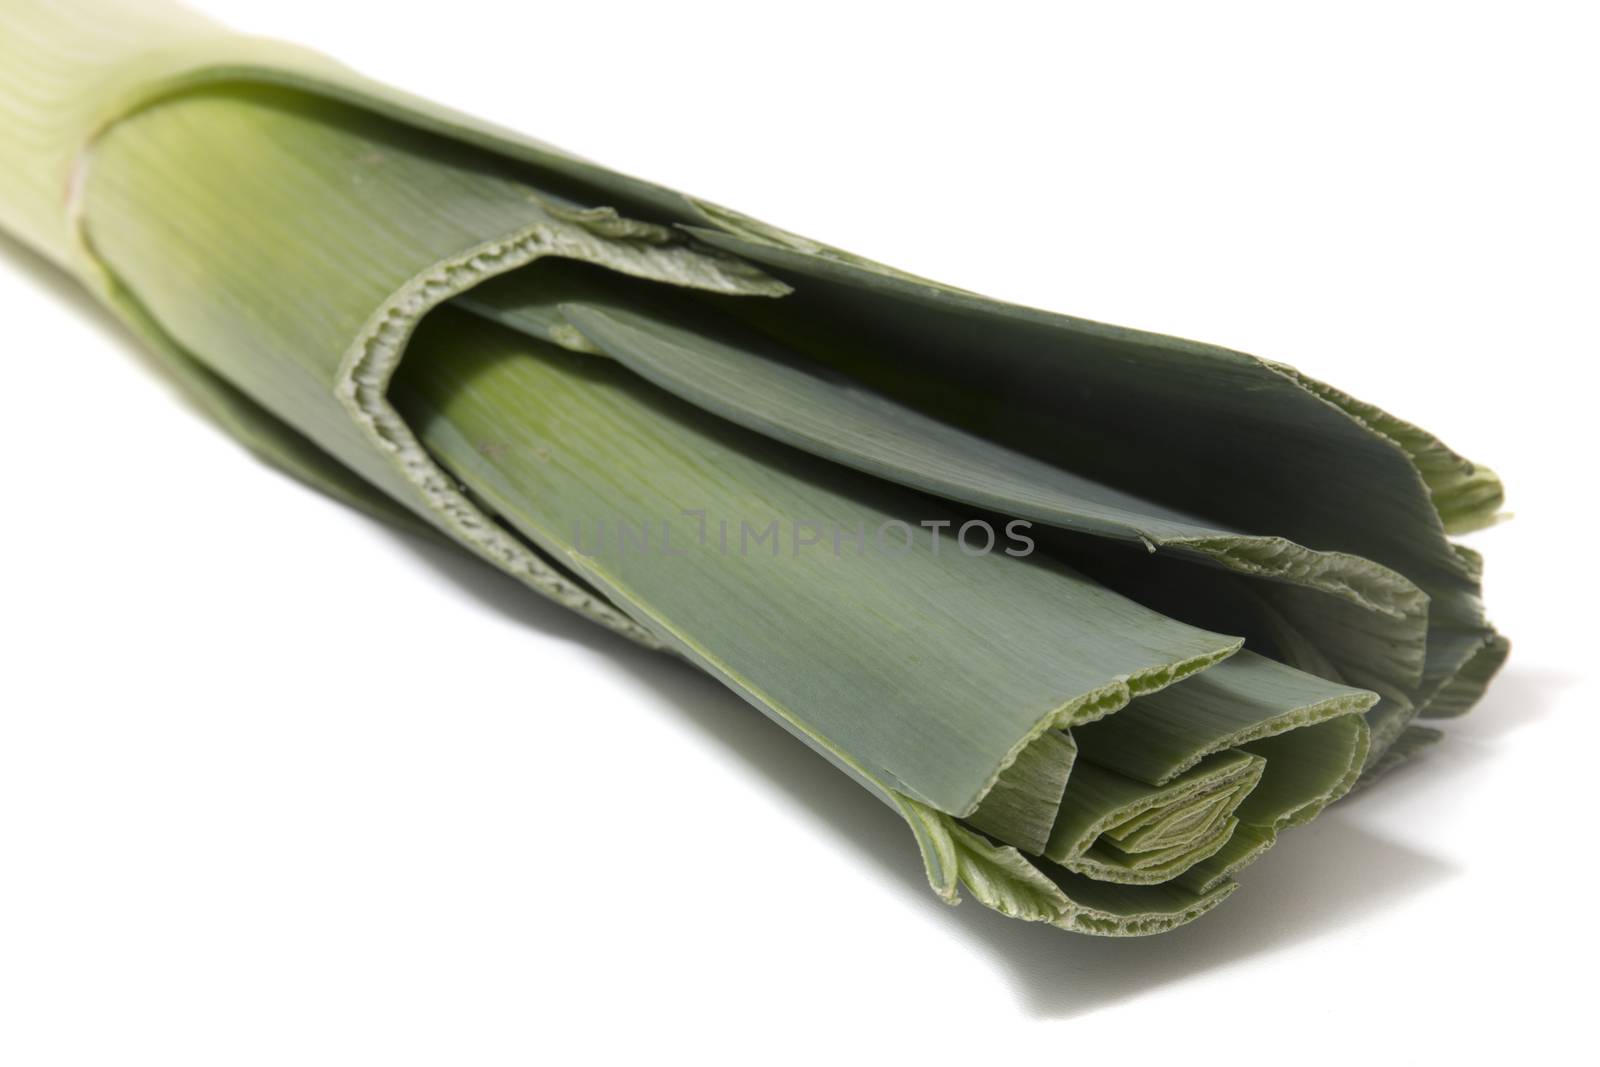 Close view of a leek vegetable on a white background.